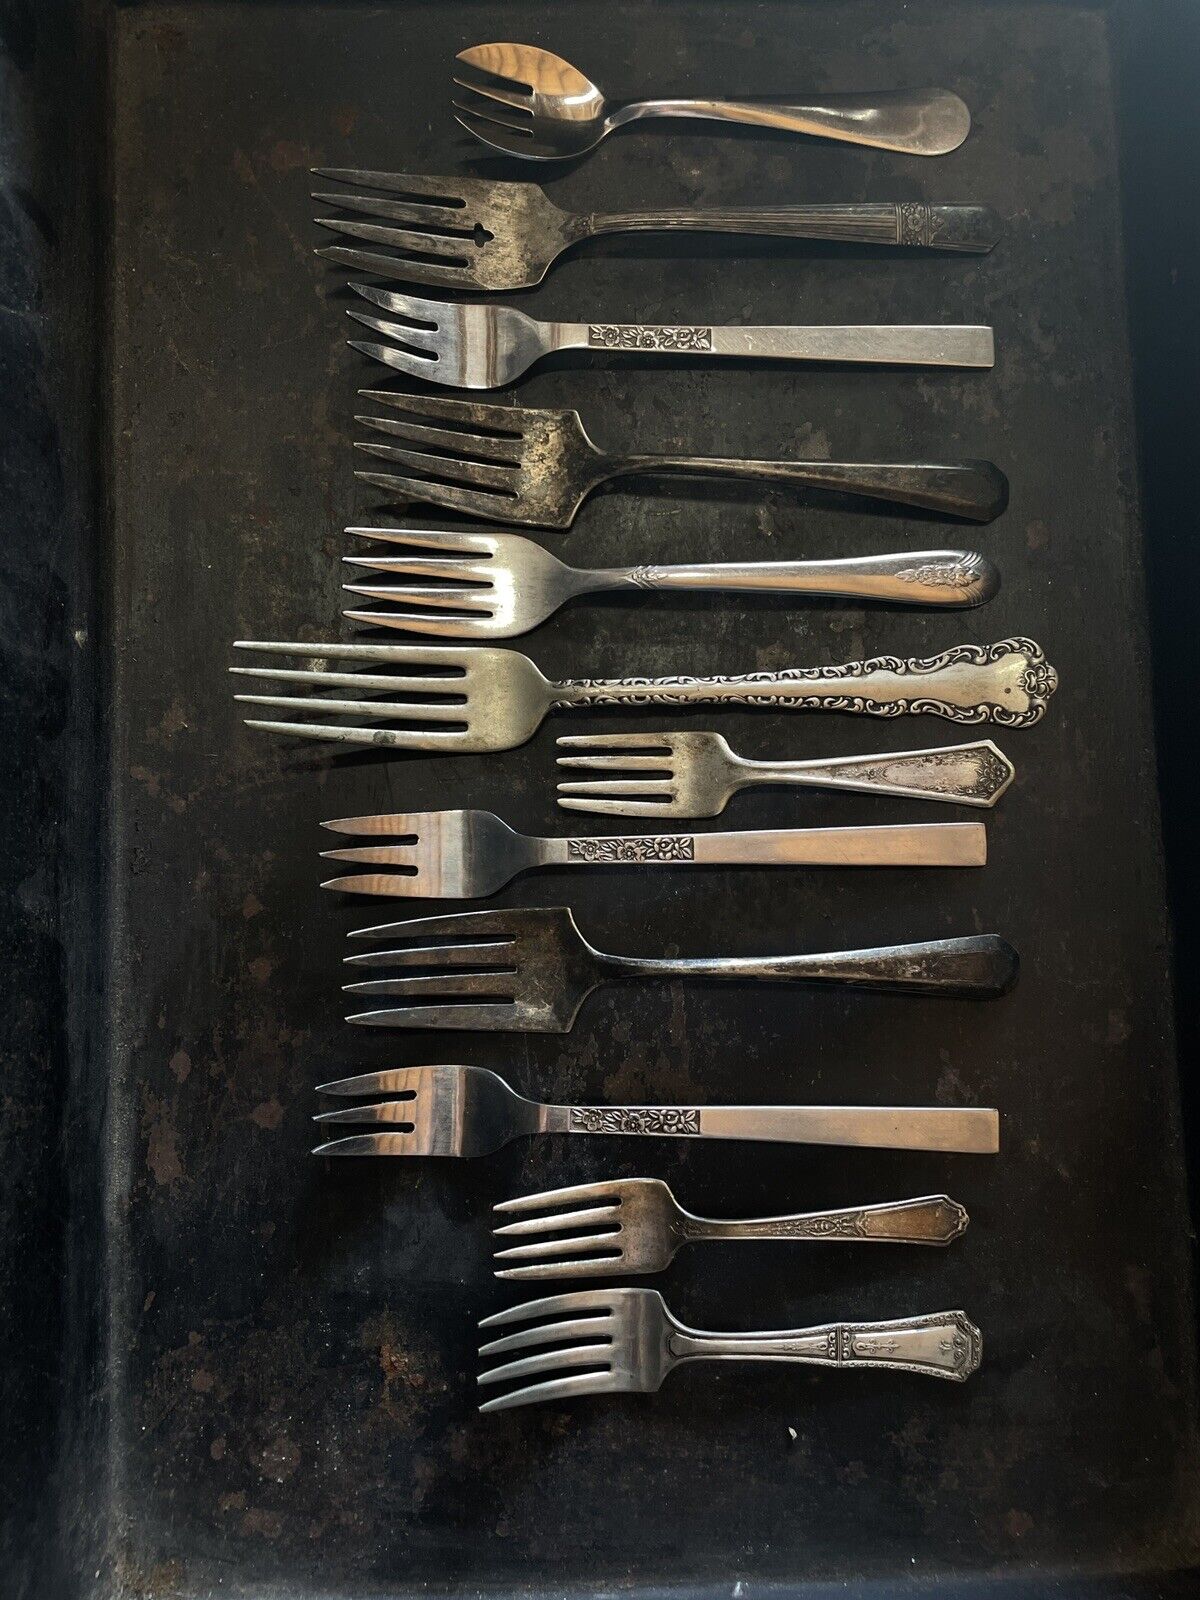 12 Piece Assorted Vintage Forks Stainless Silverplate Baby Wm Rogers Photo Props